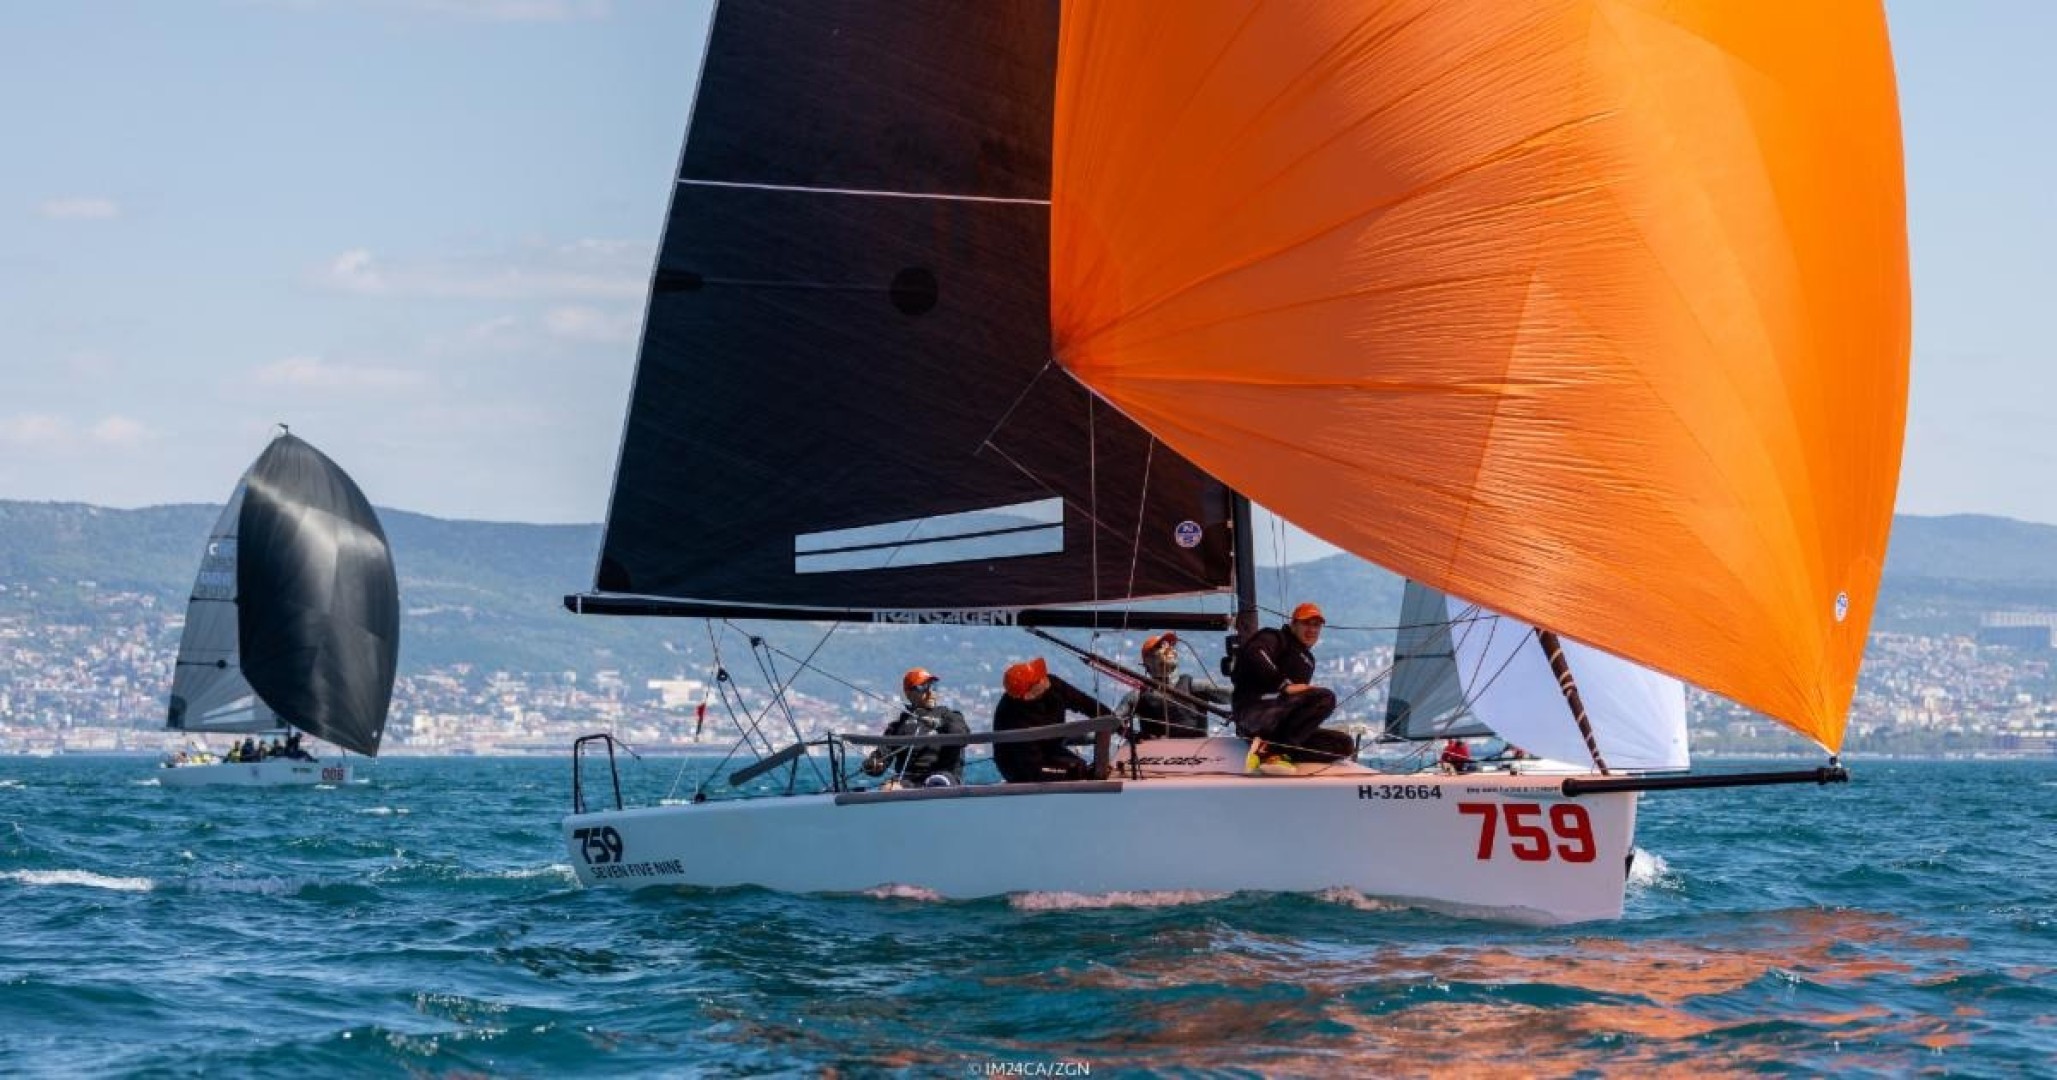 The Hungarian team Seven_Five_Nine HUN759 of Akos Csolto took two bullets and third place on the opening day and is leading the pack after Day One at the second event of the Melges 24 European Sailing Series 2022 in Trieste, Italy
© IM24CA/Zerogradinord